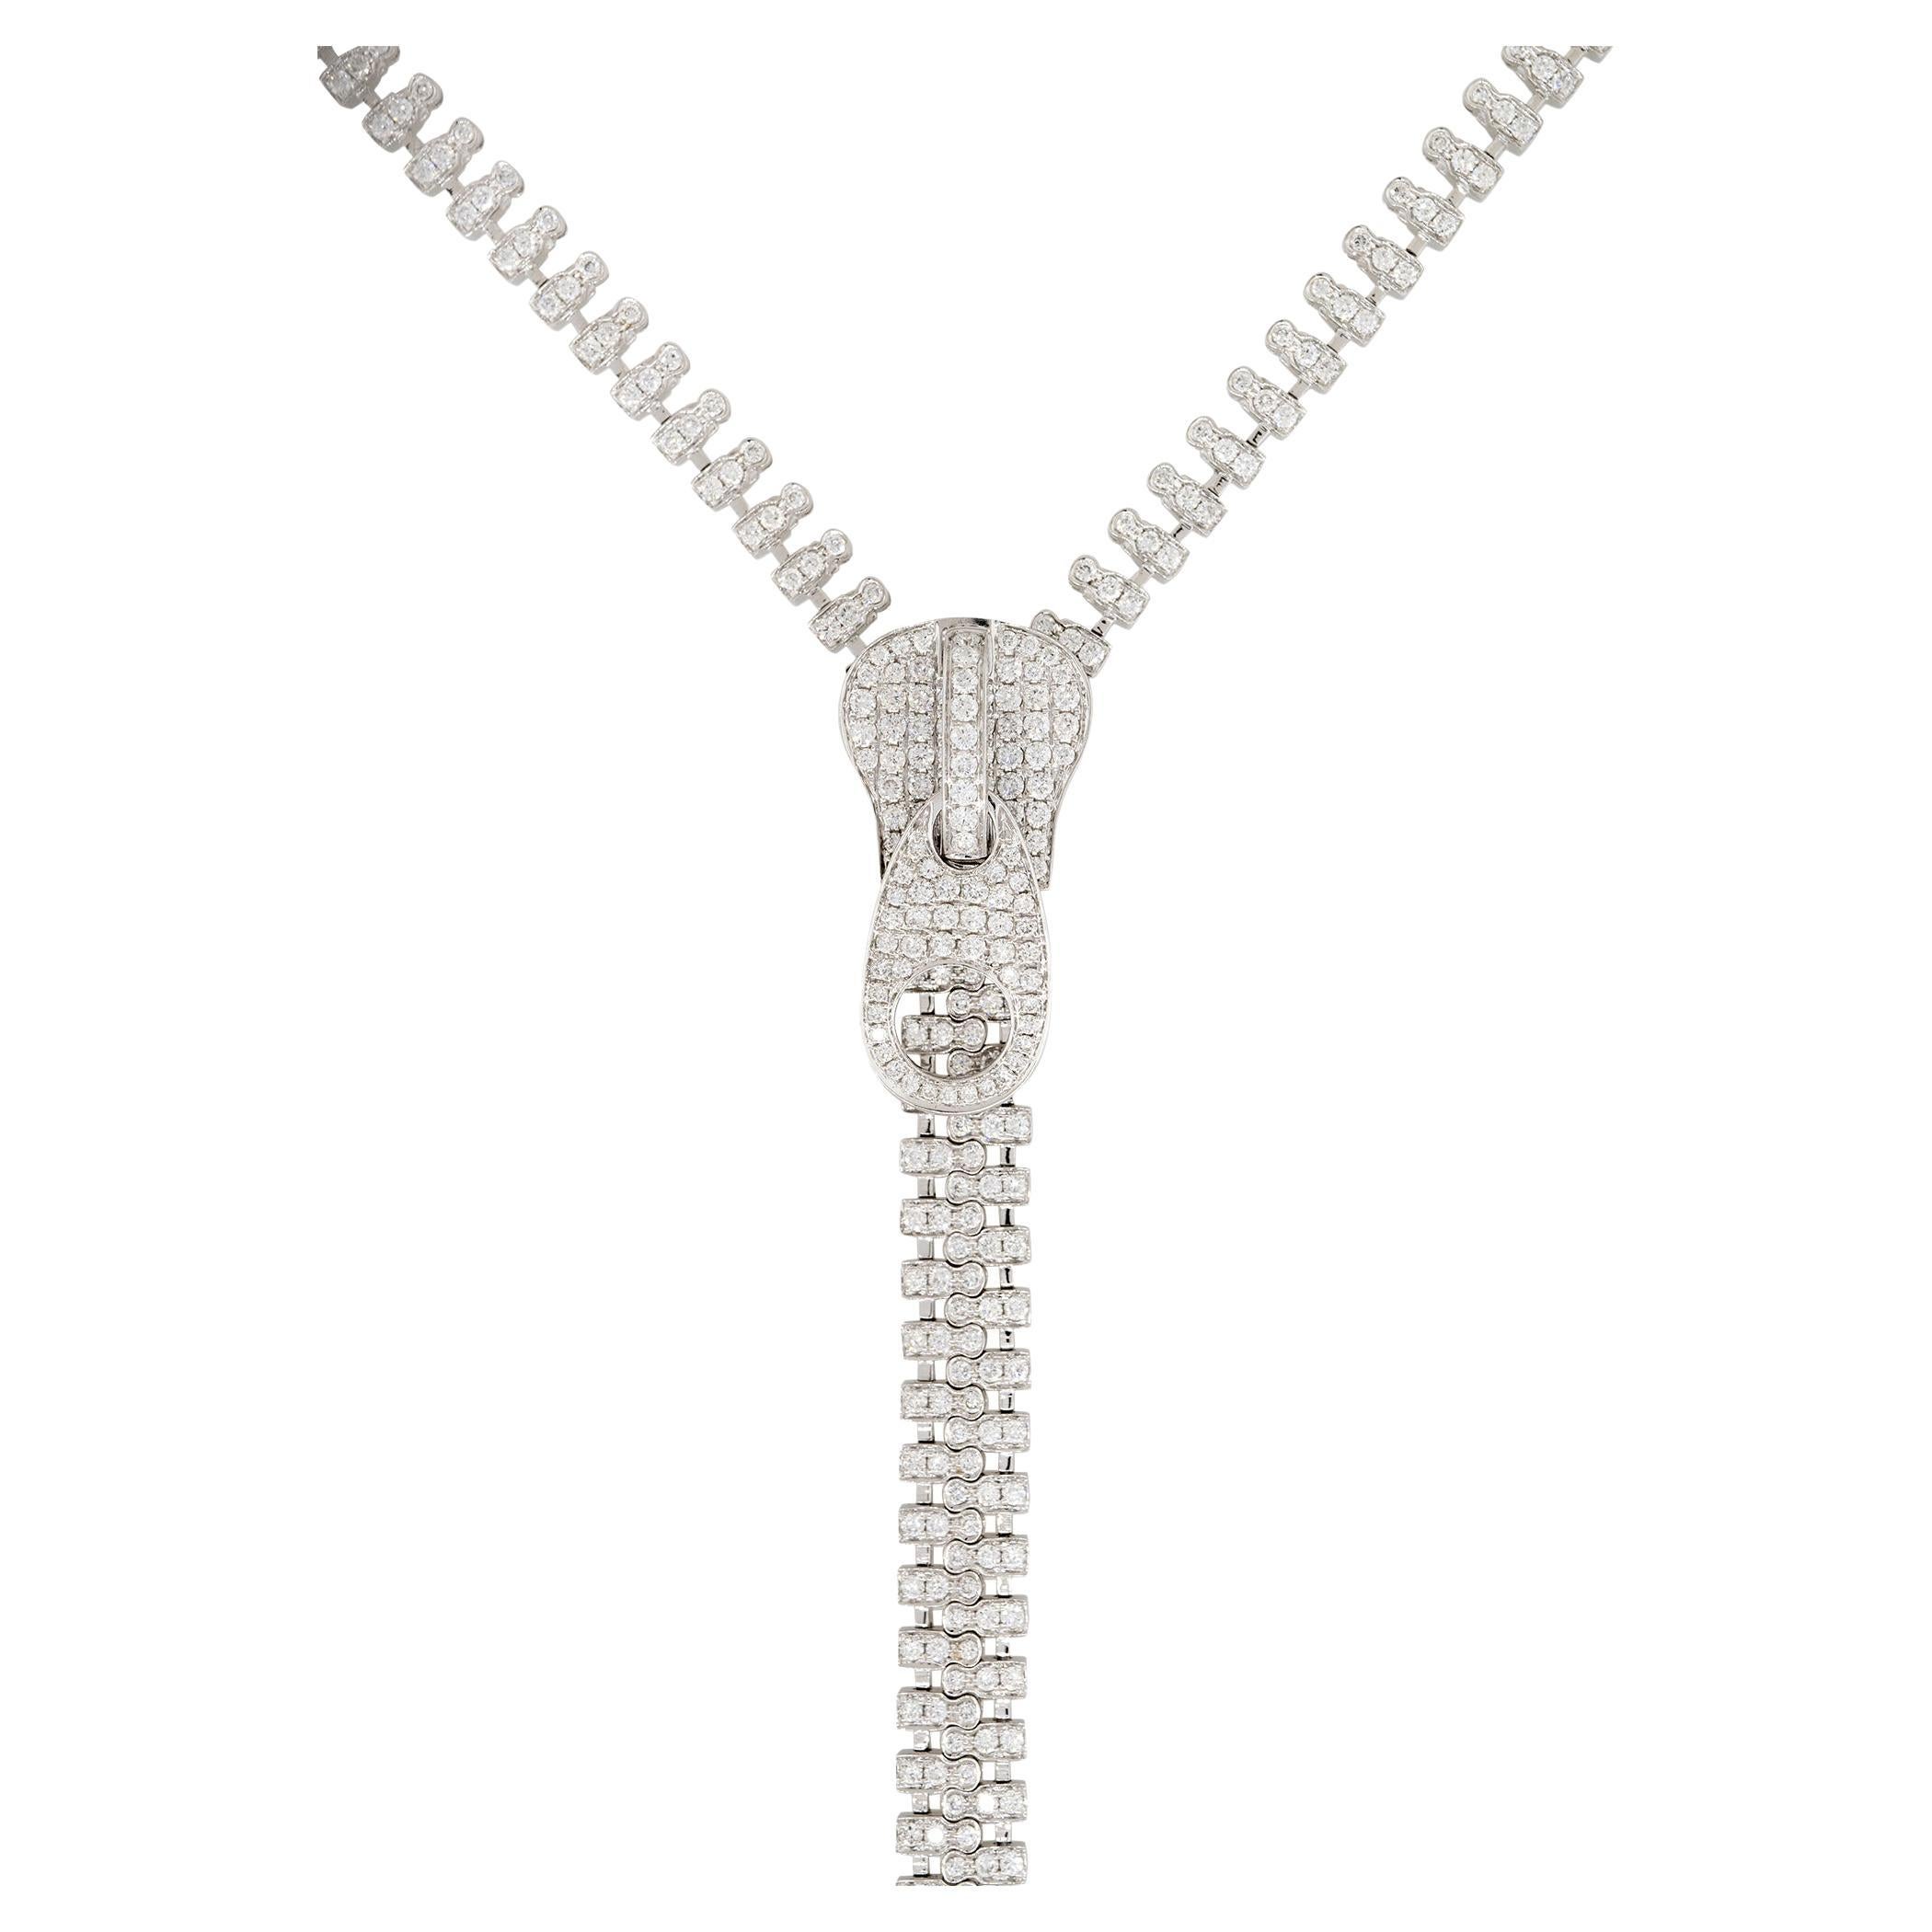 18K 33-Inch Long Zipper Necklace with Pave Diamond Zipper Pull